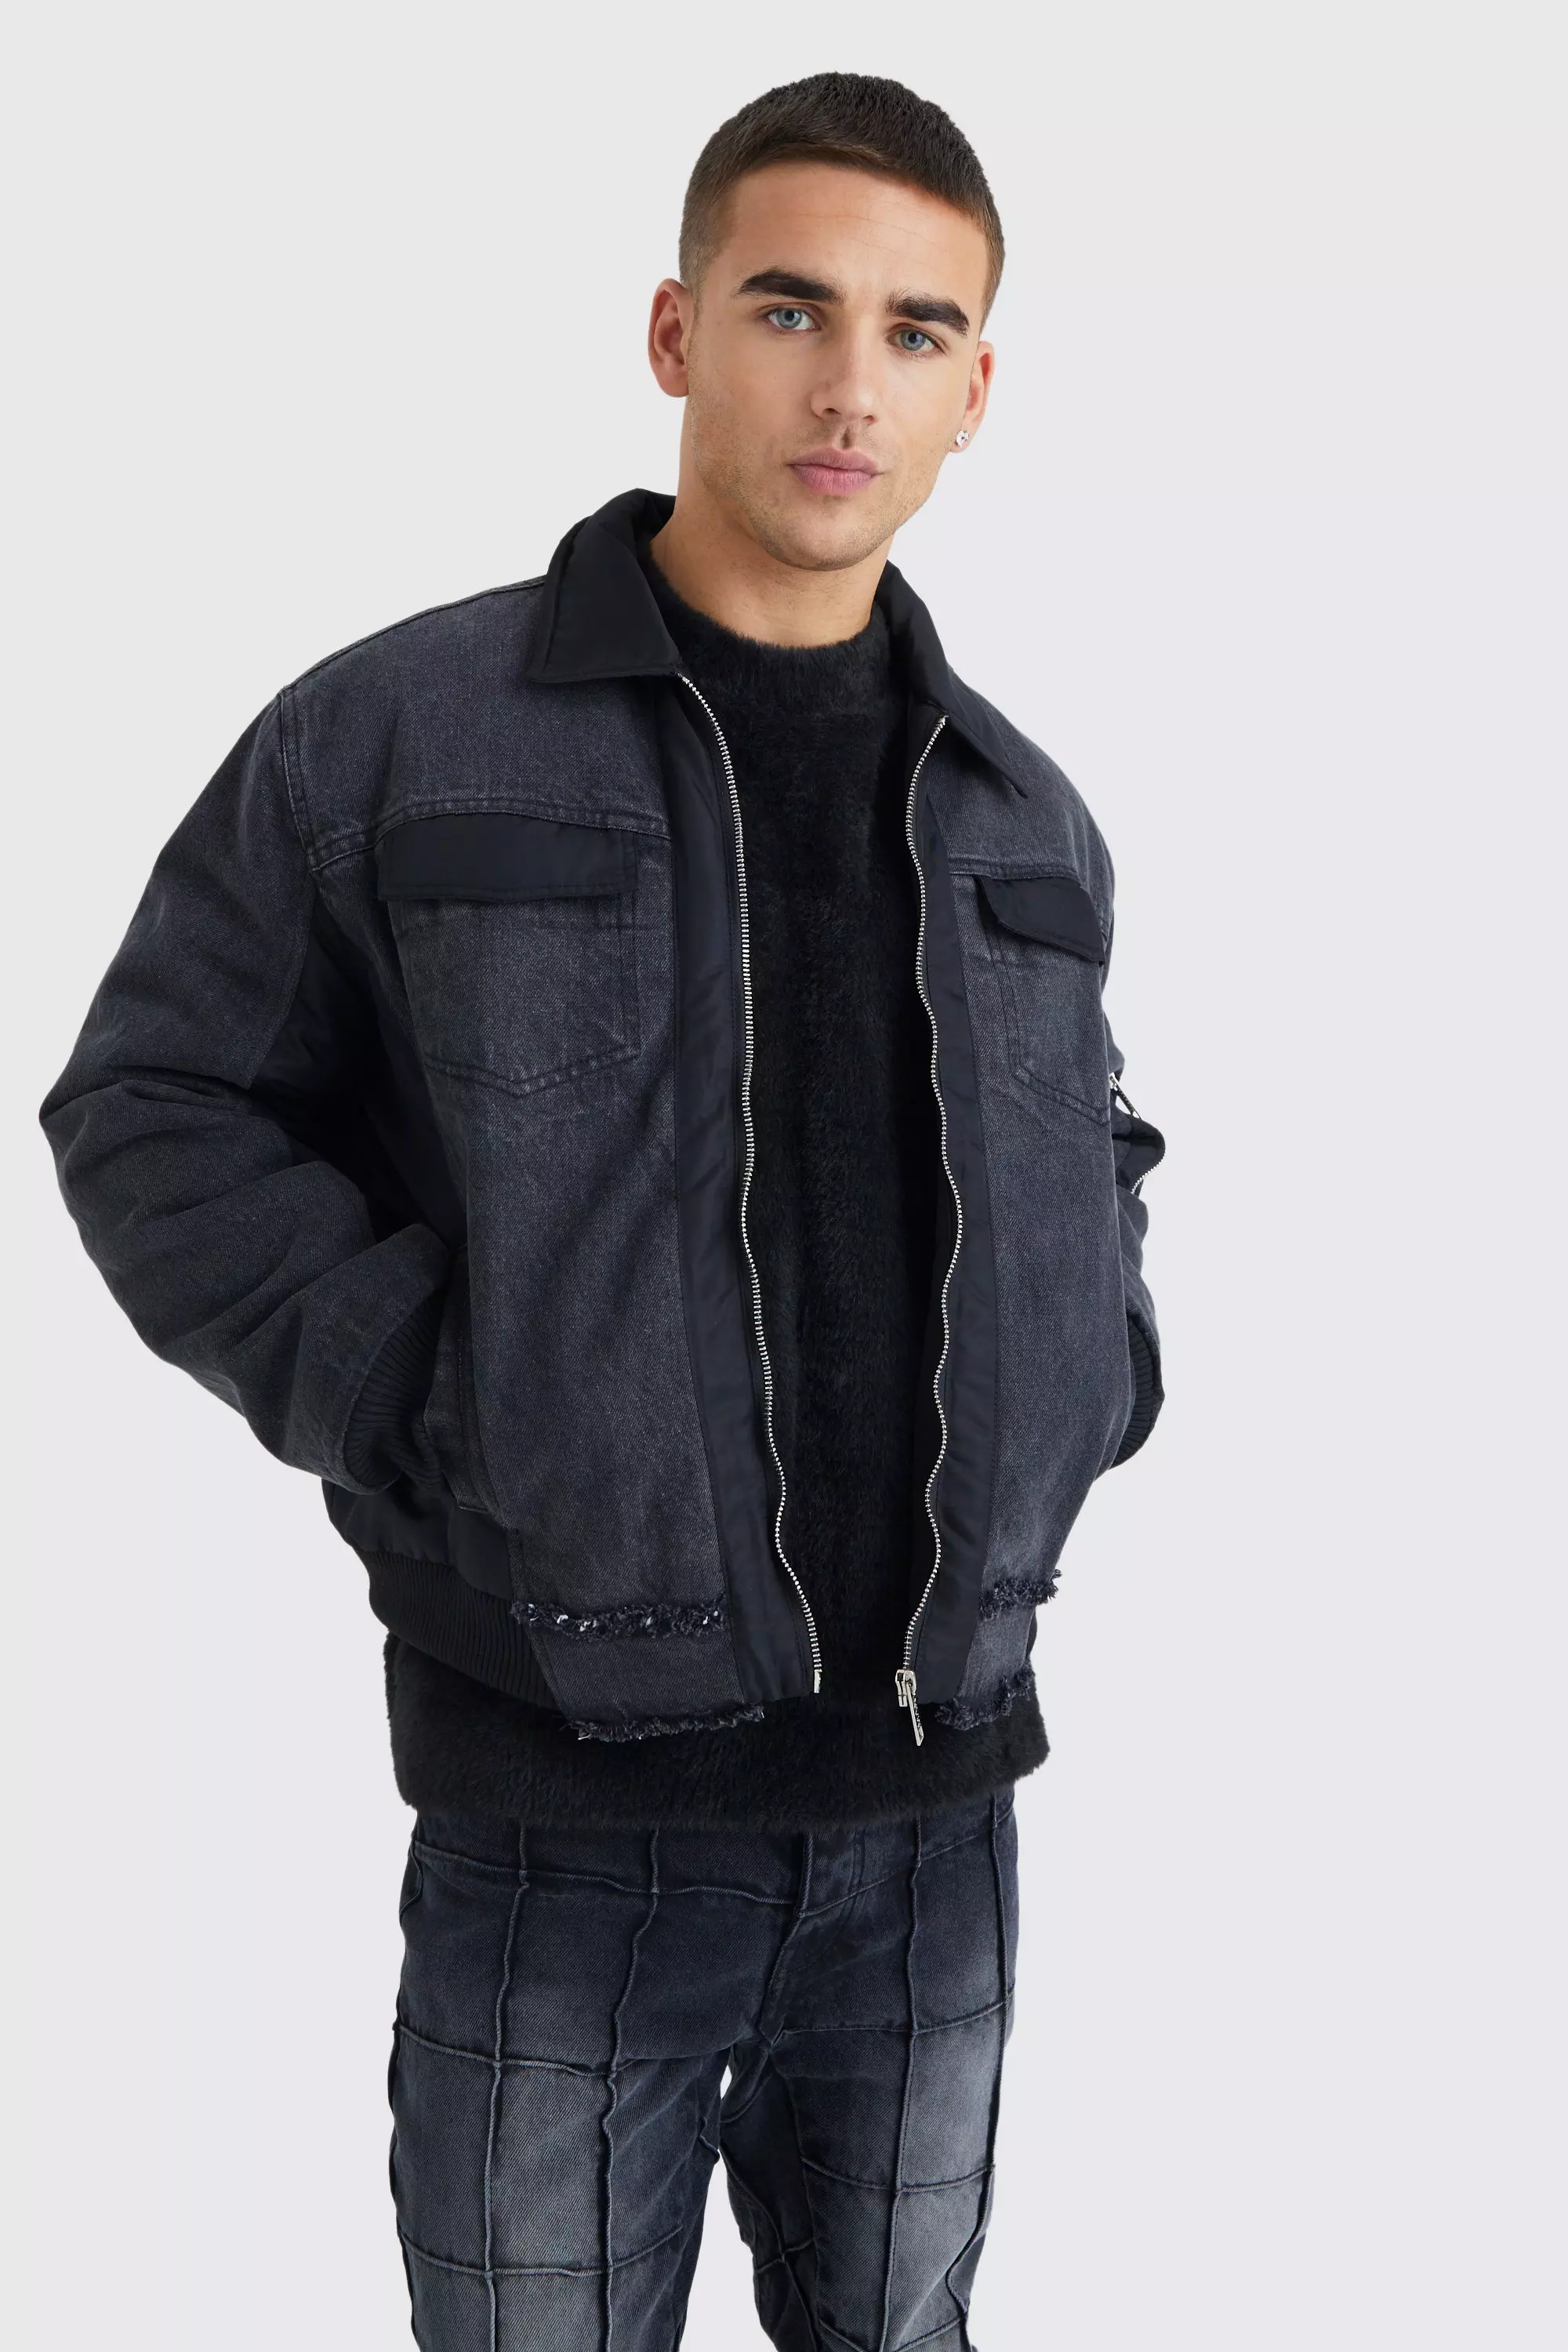 boohooMAN Applique and Embroidered Denim Jacket - Black - Size XL